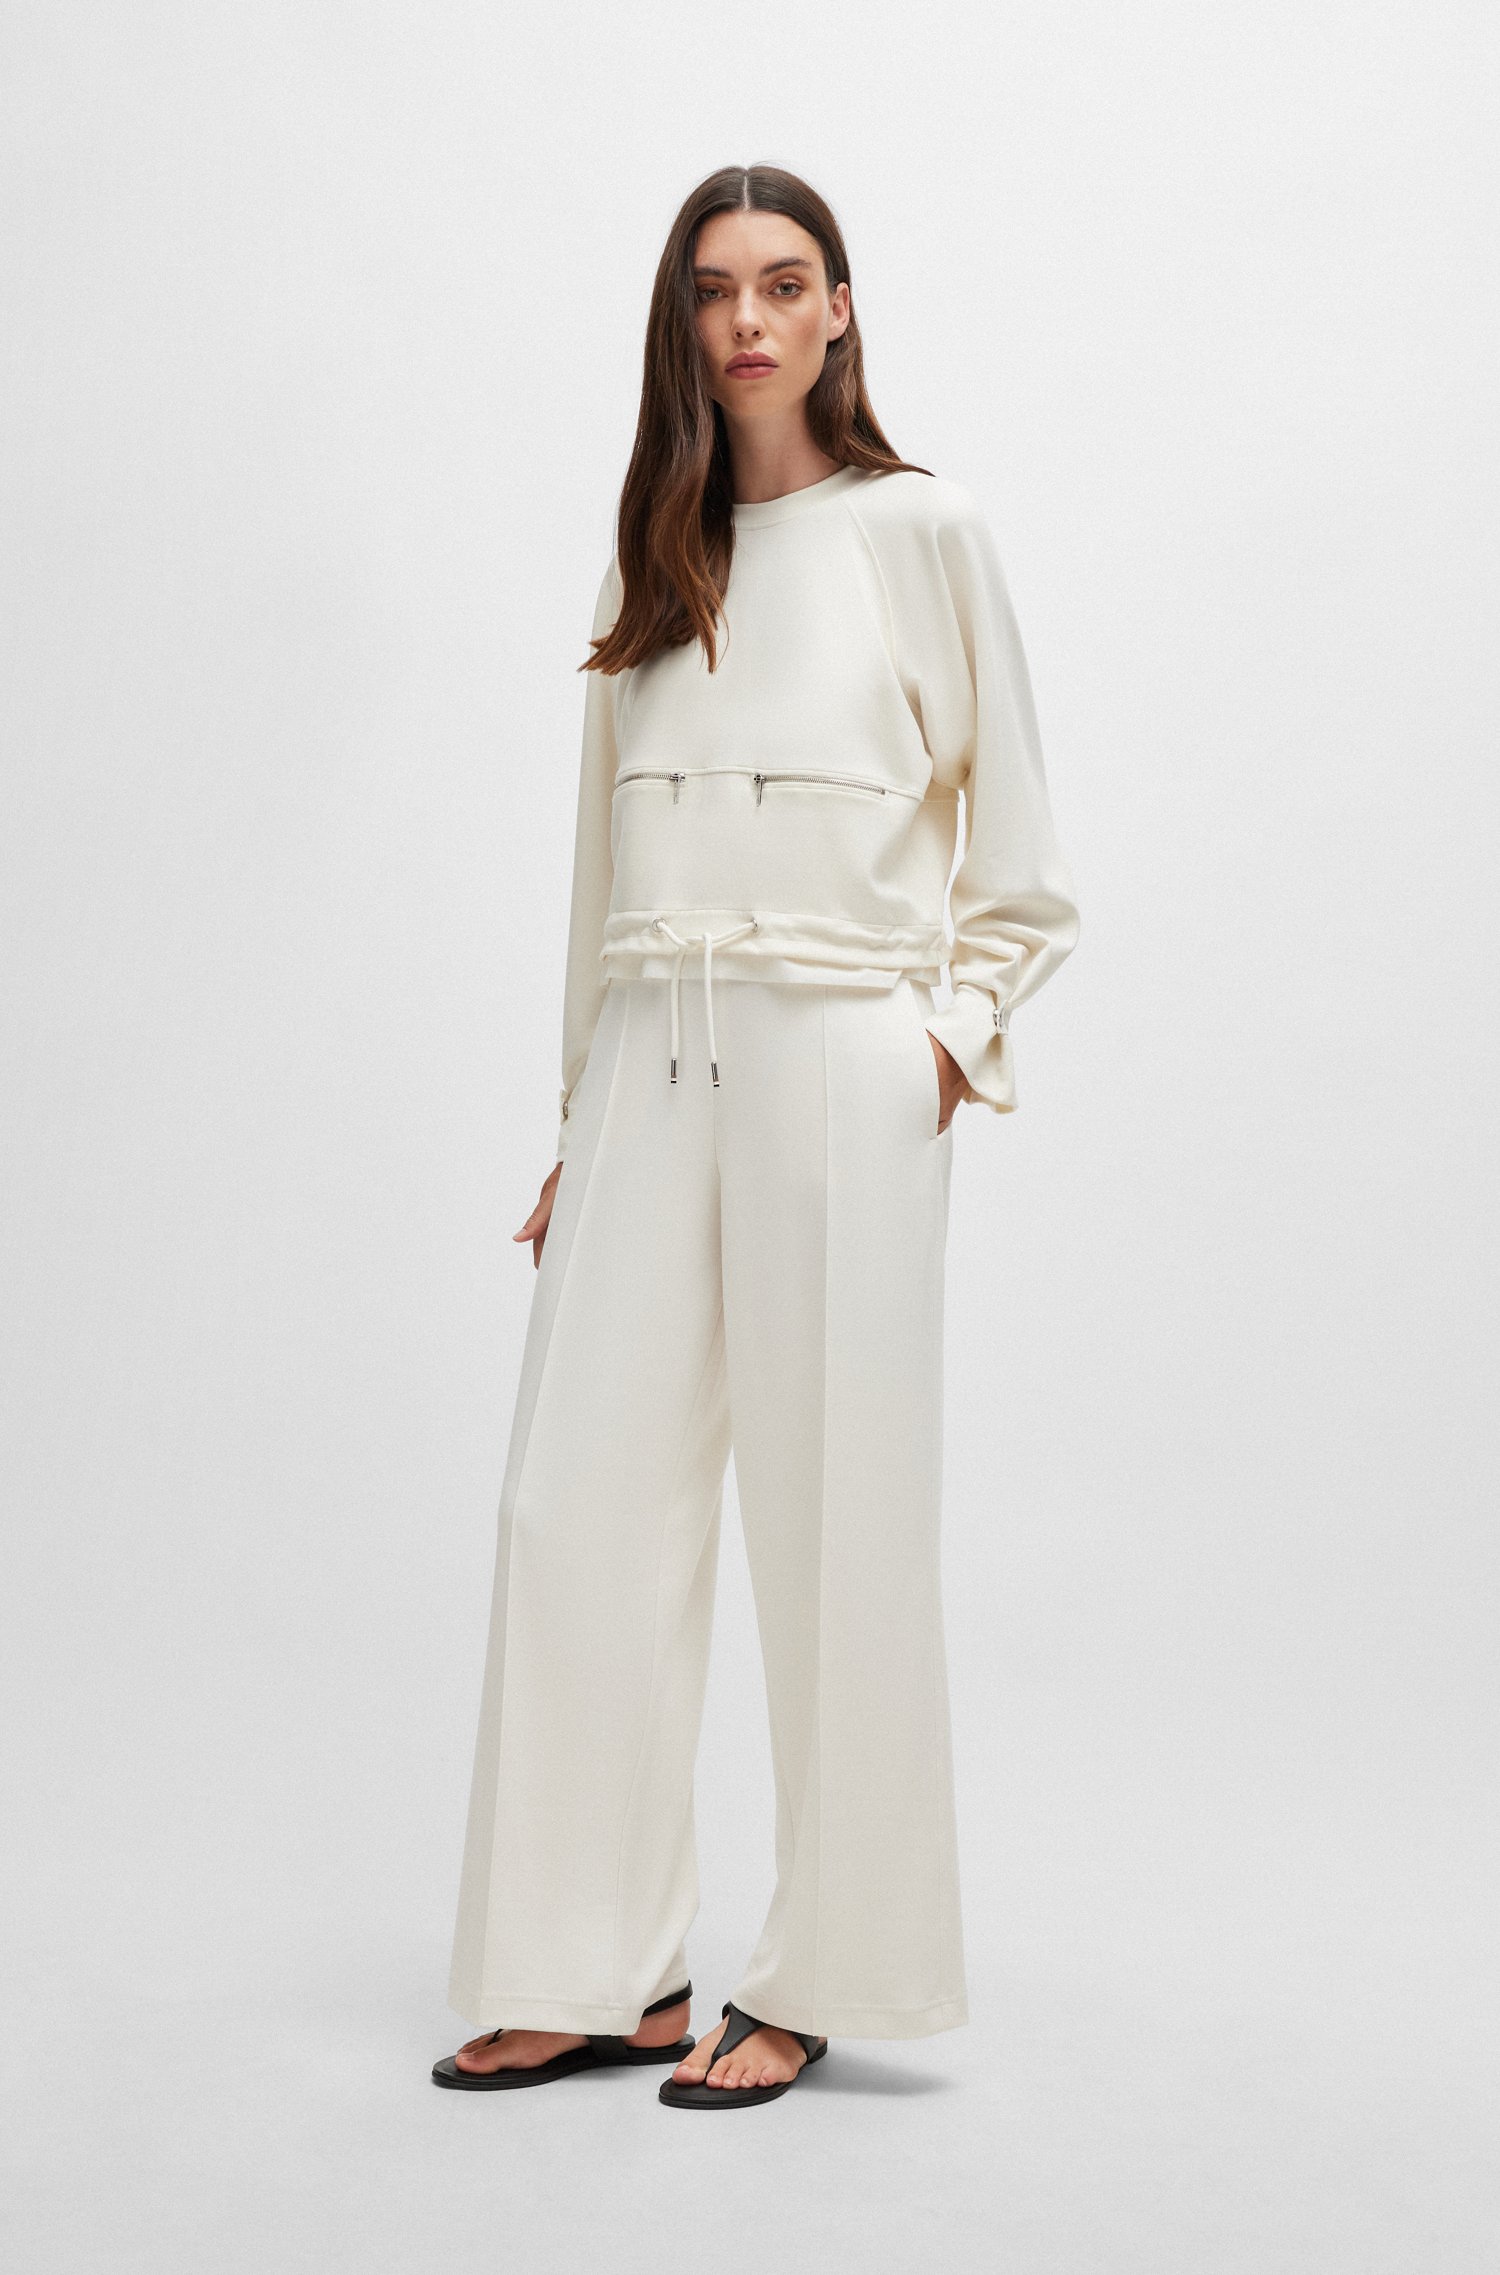 Piqué jersey trousers with front pleats